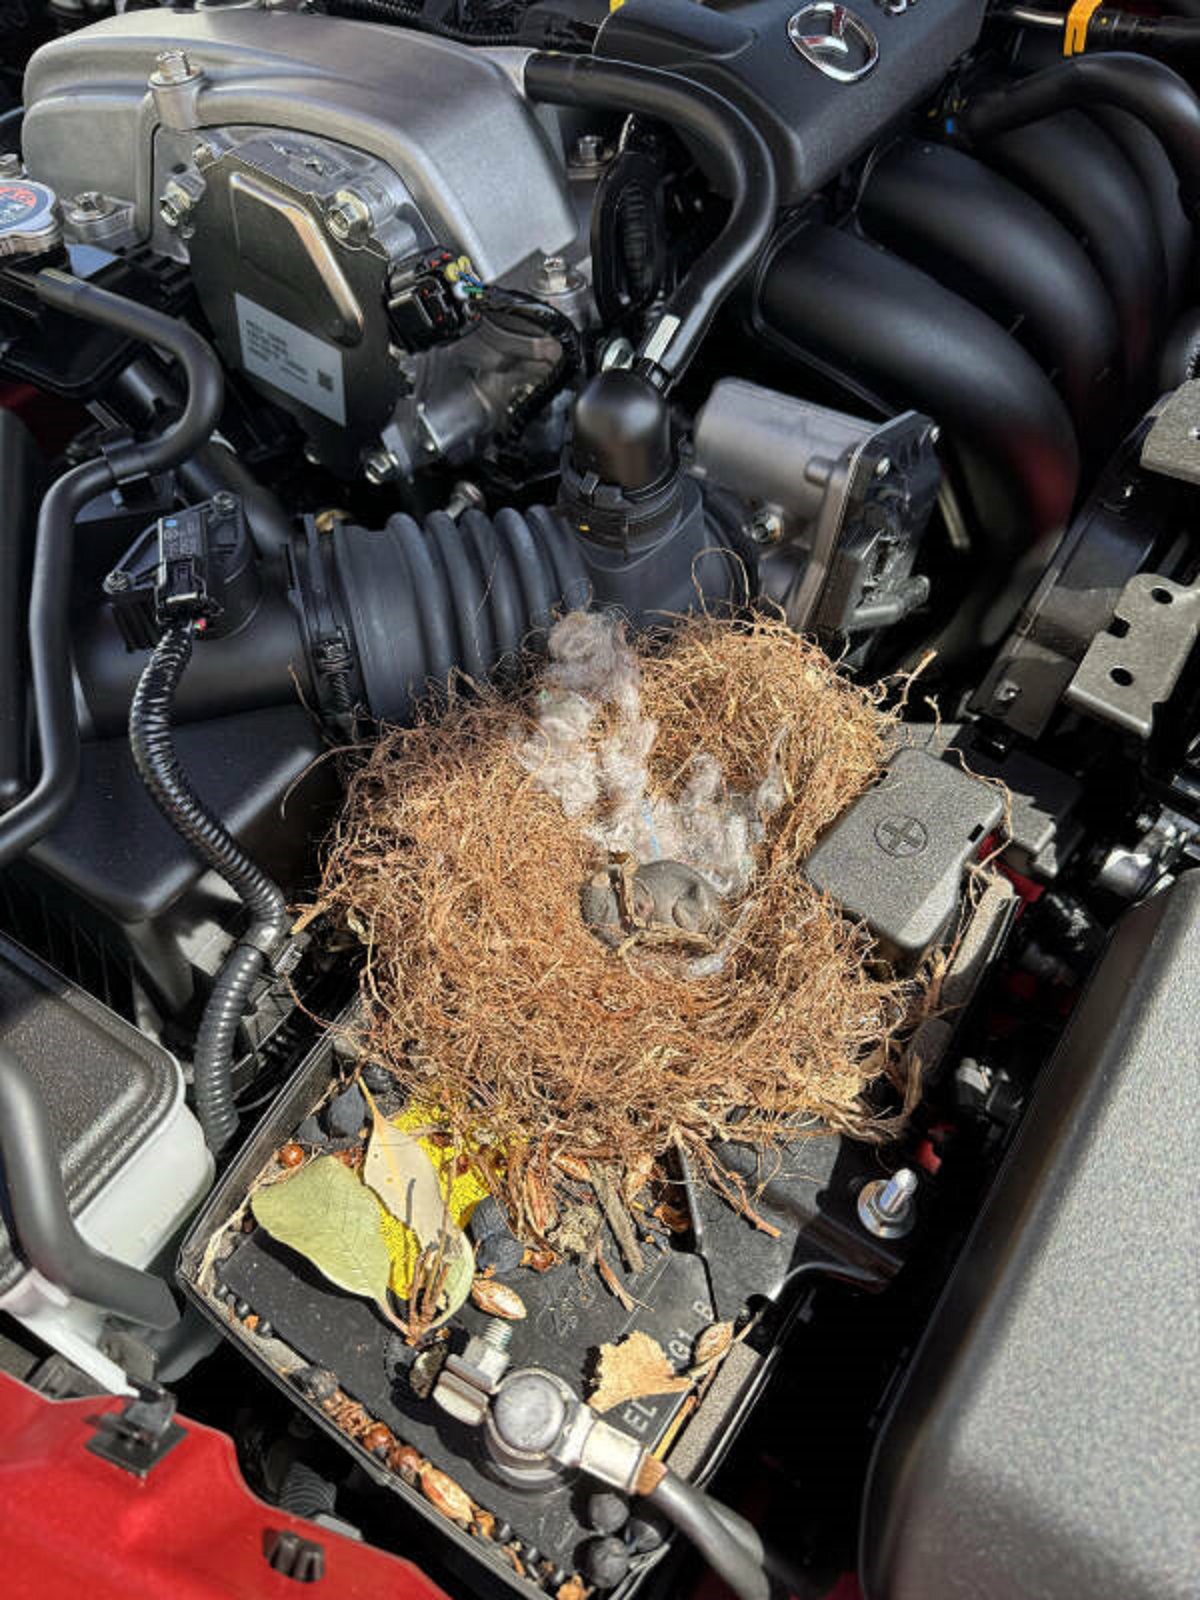 “Went to top off my wiper fluid and found this”